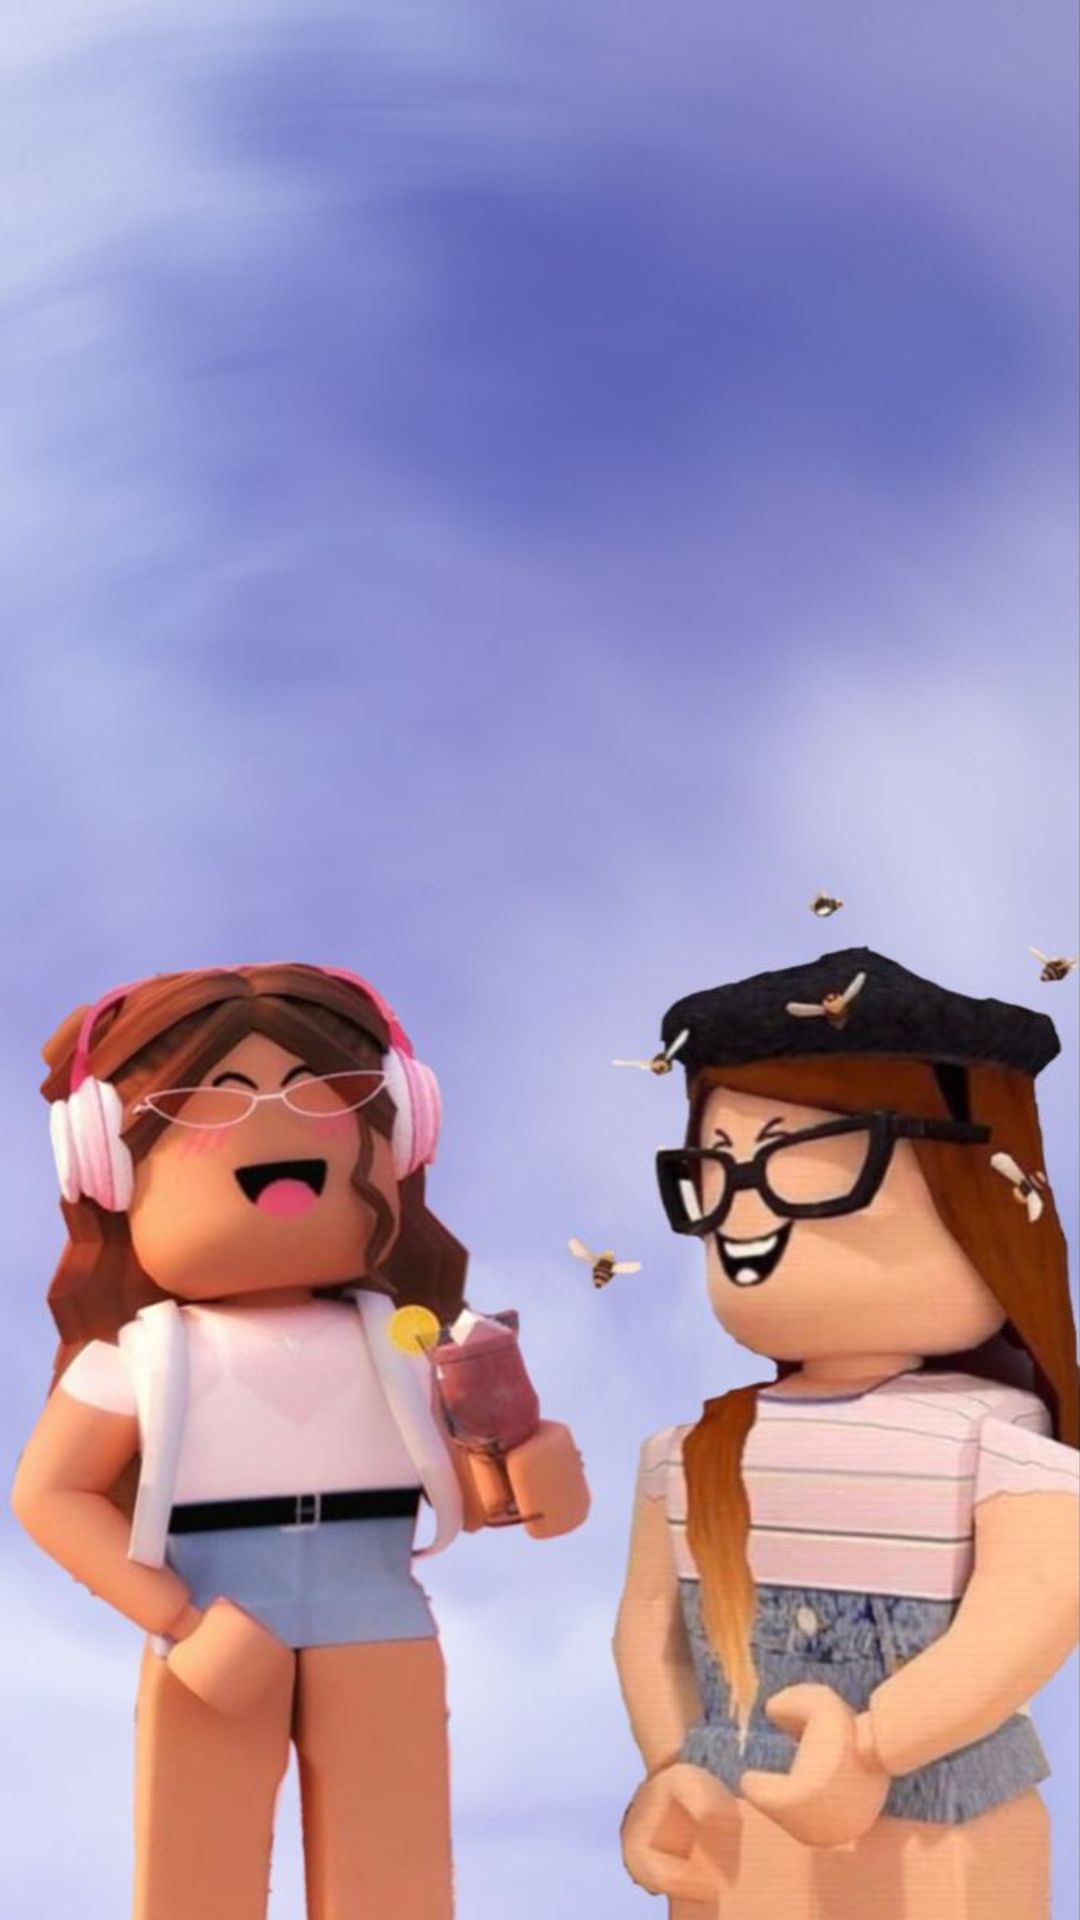 Roblox BFF Wallpapers - Top 20 Best Roblox BFF Wallpapers [ HQ ]